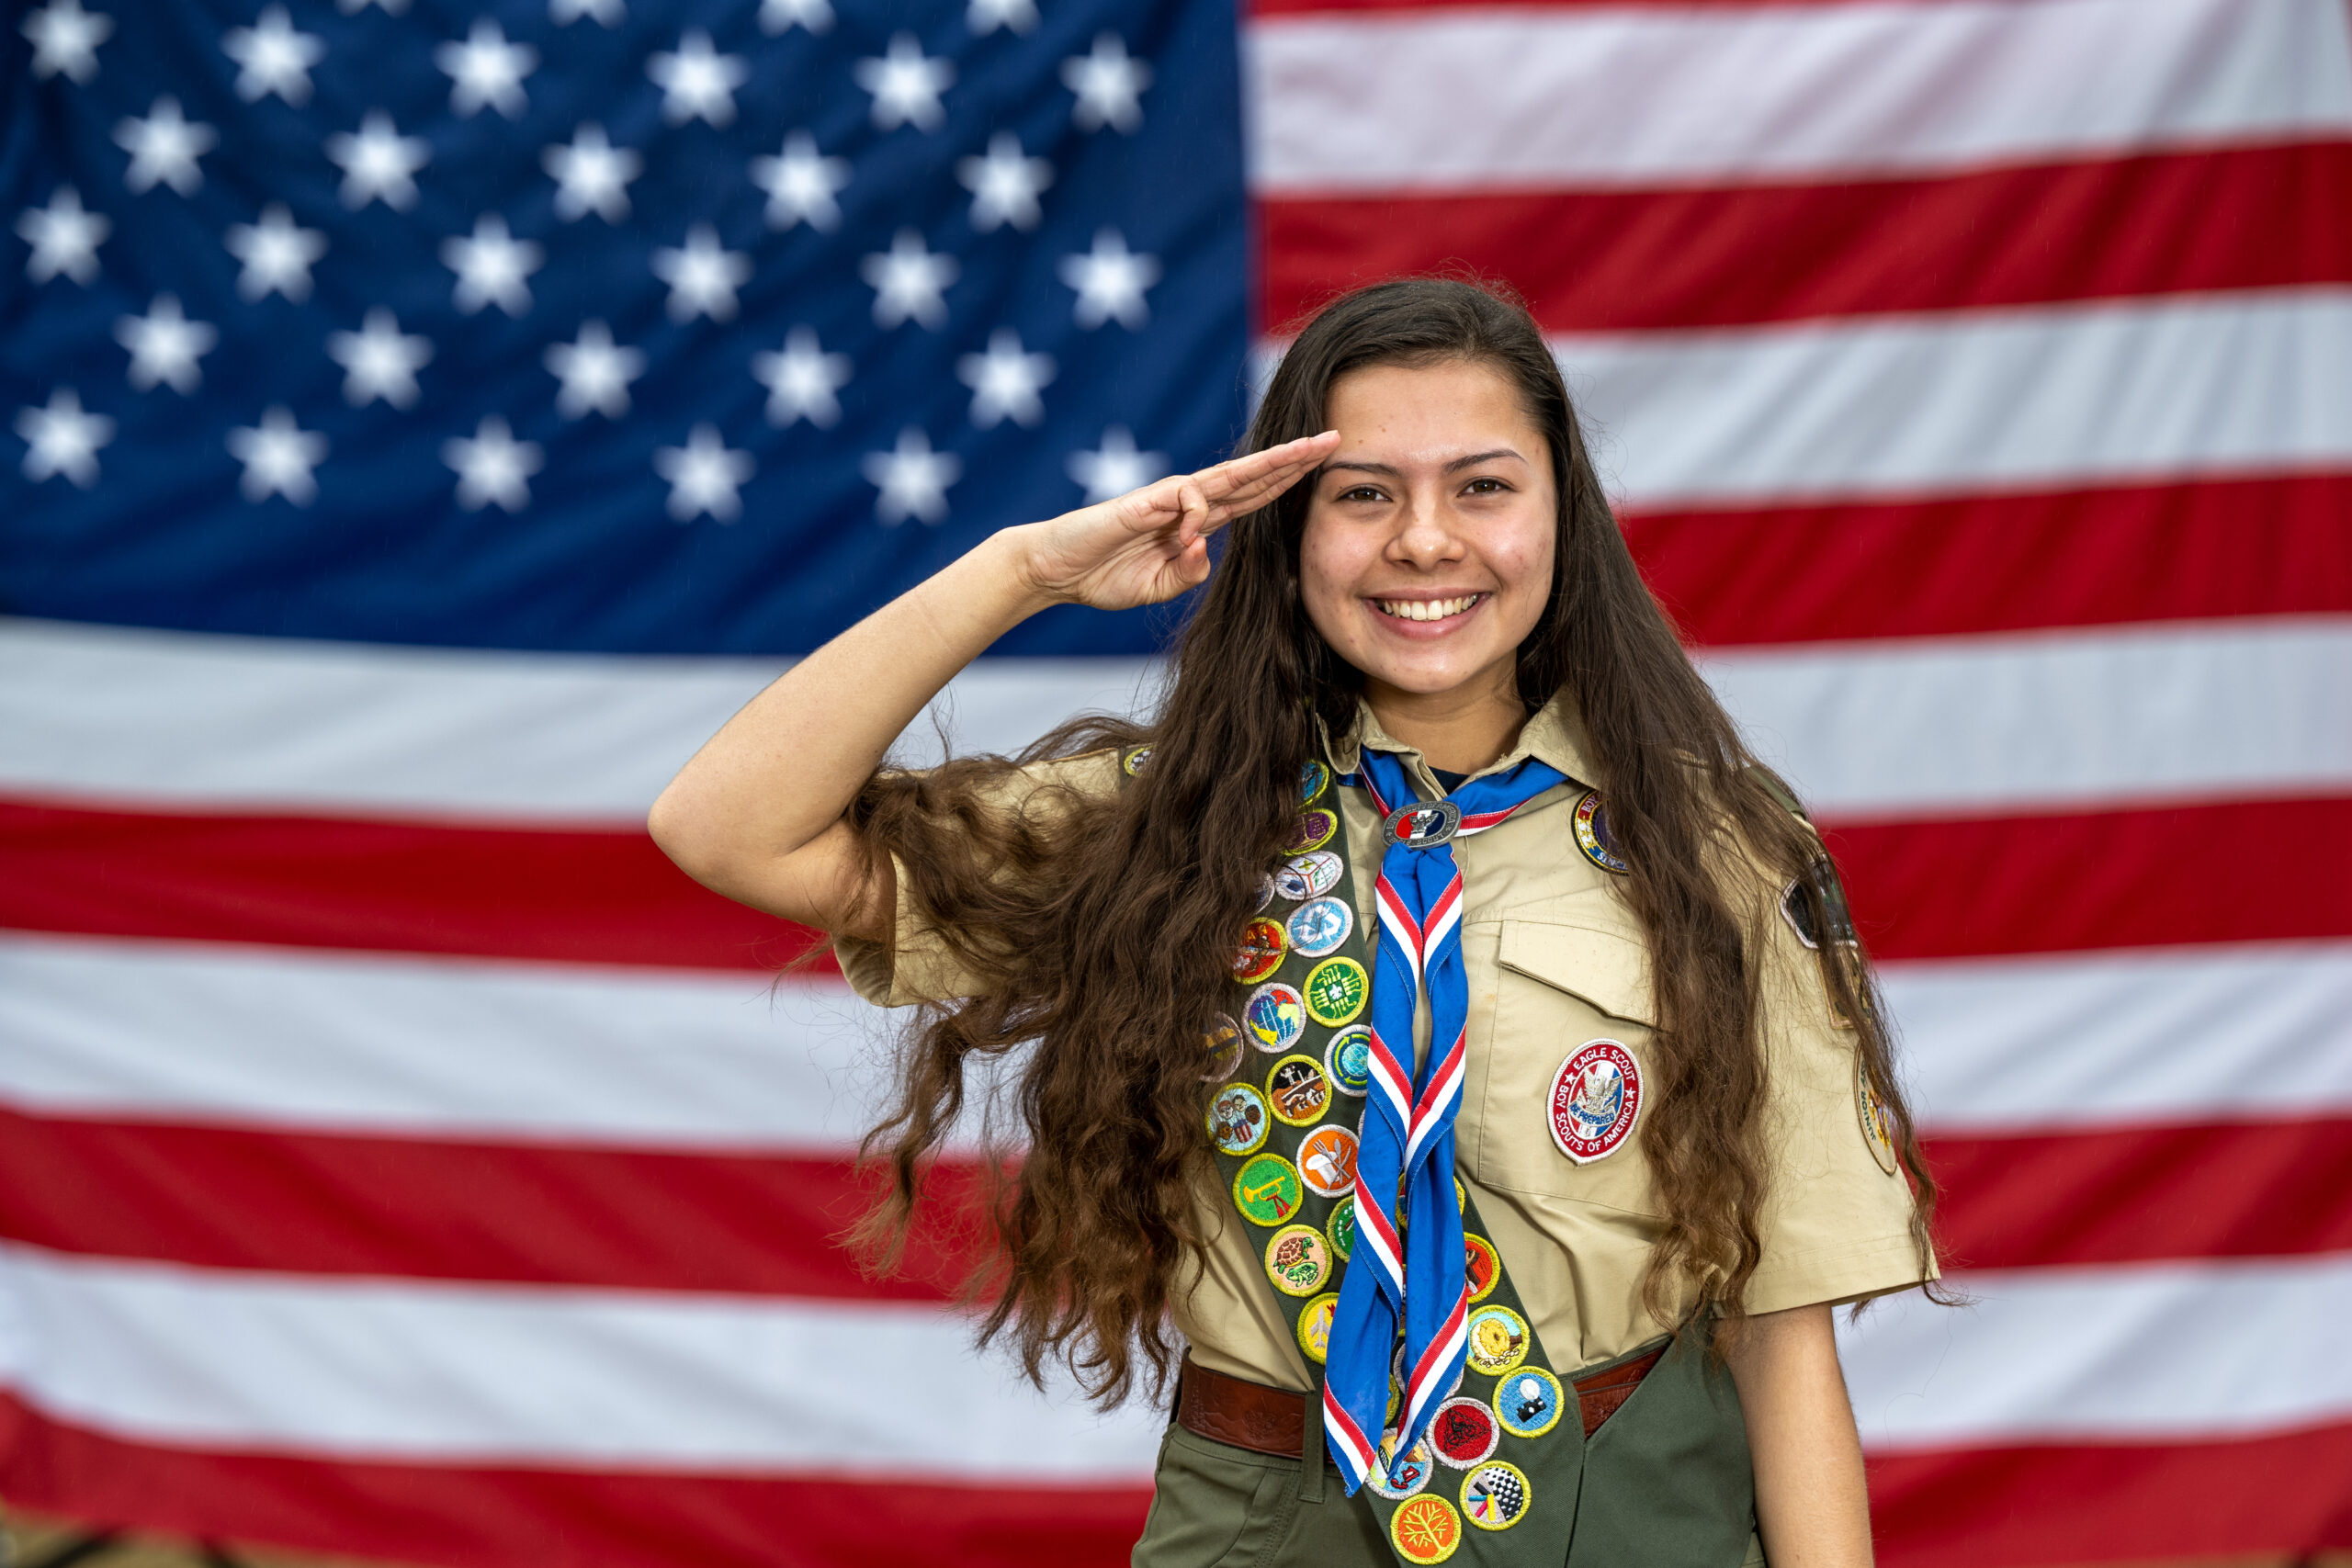 Eagle scout wearing a merit badge sash saluting in front of an American flag